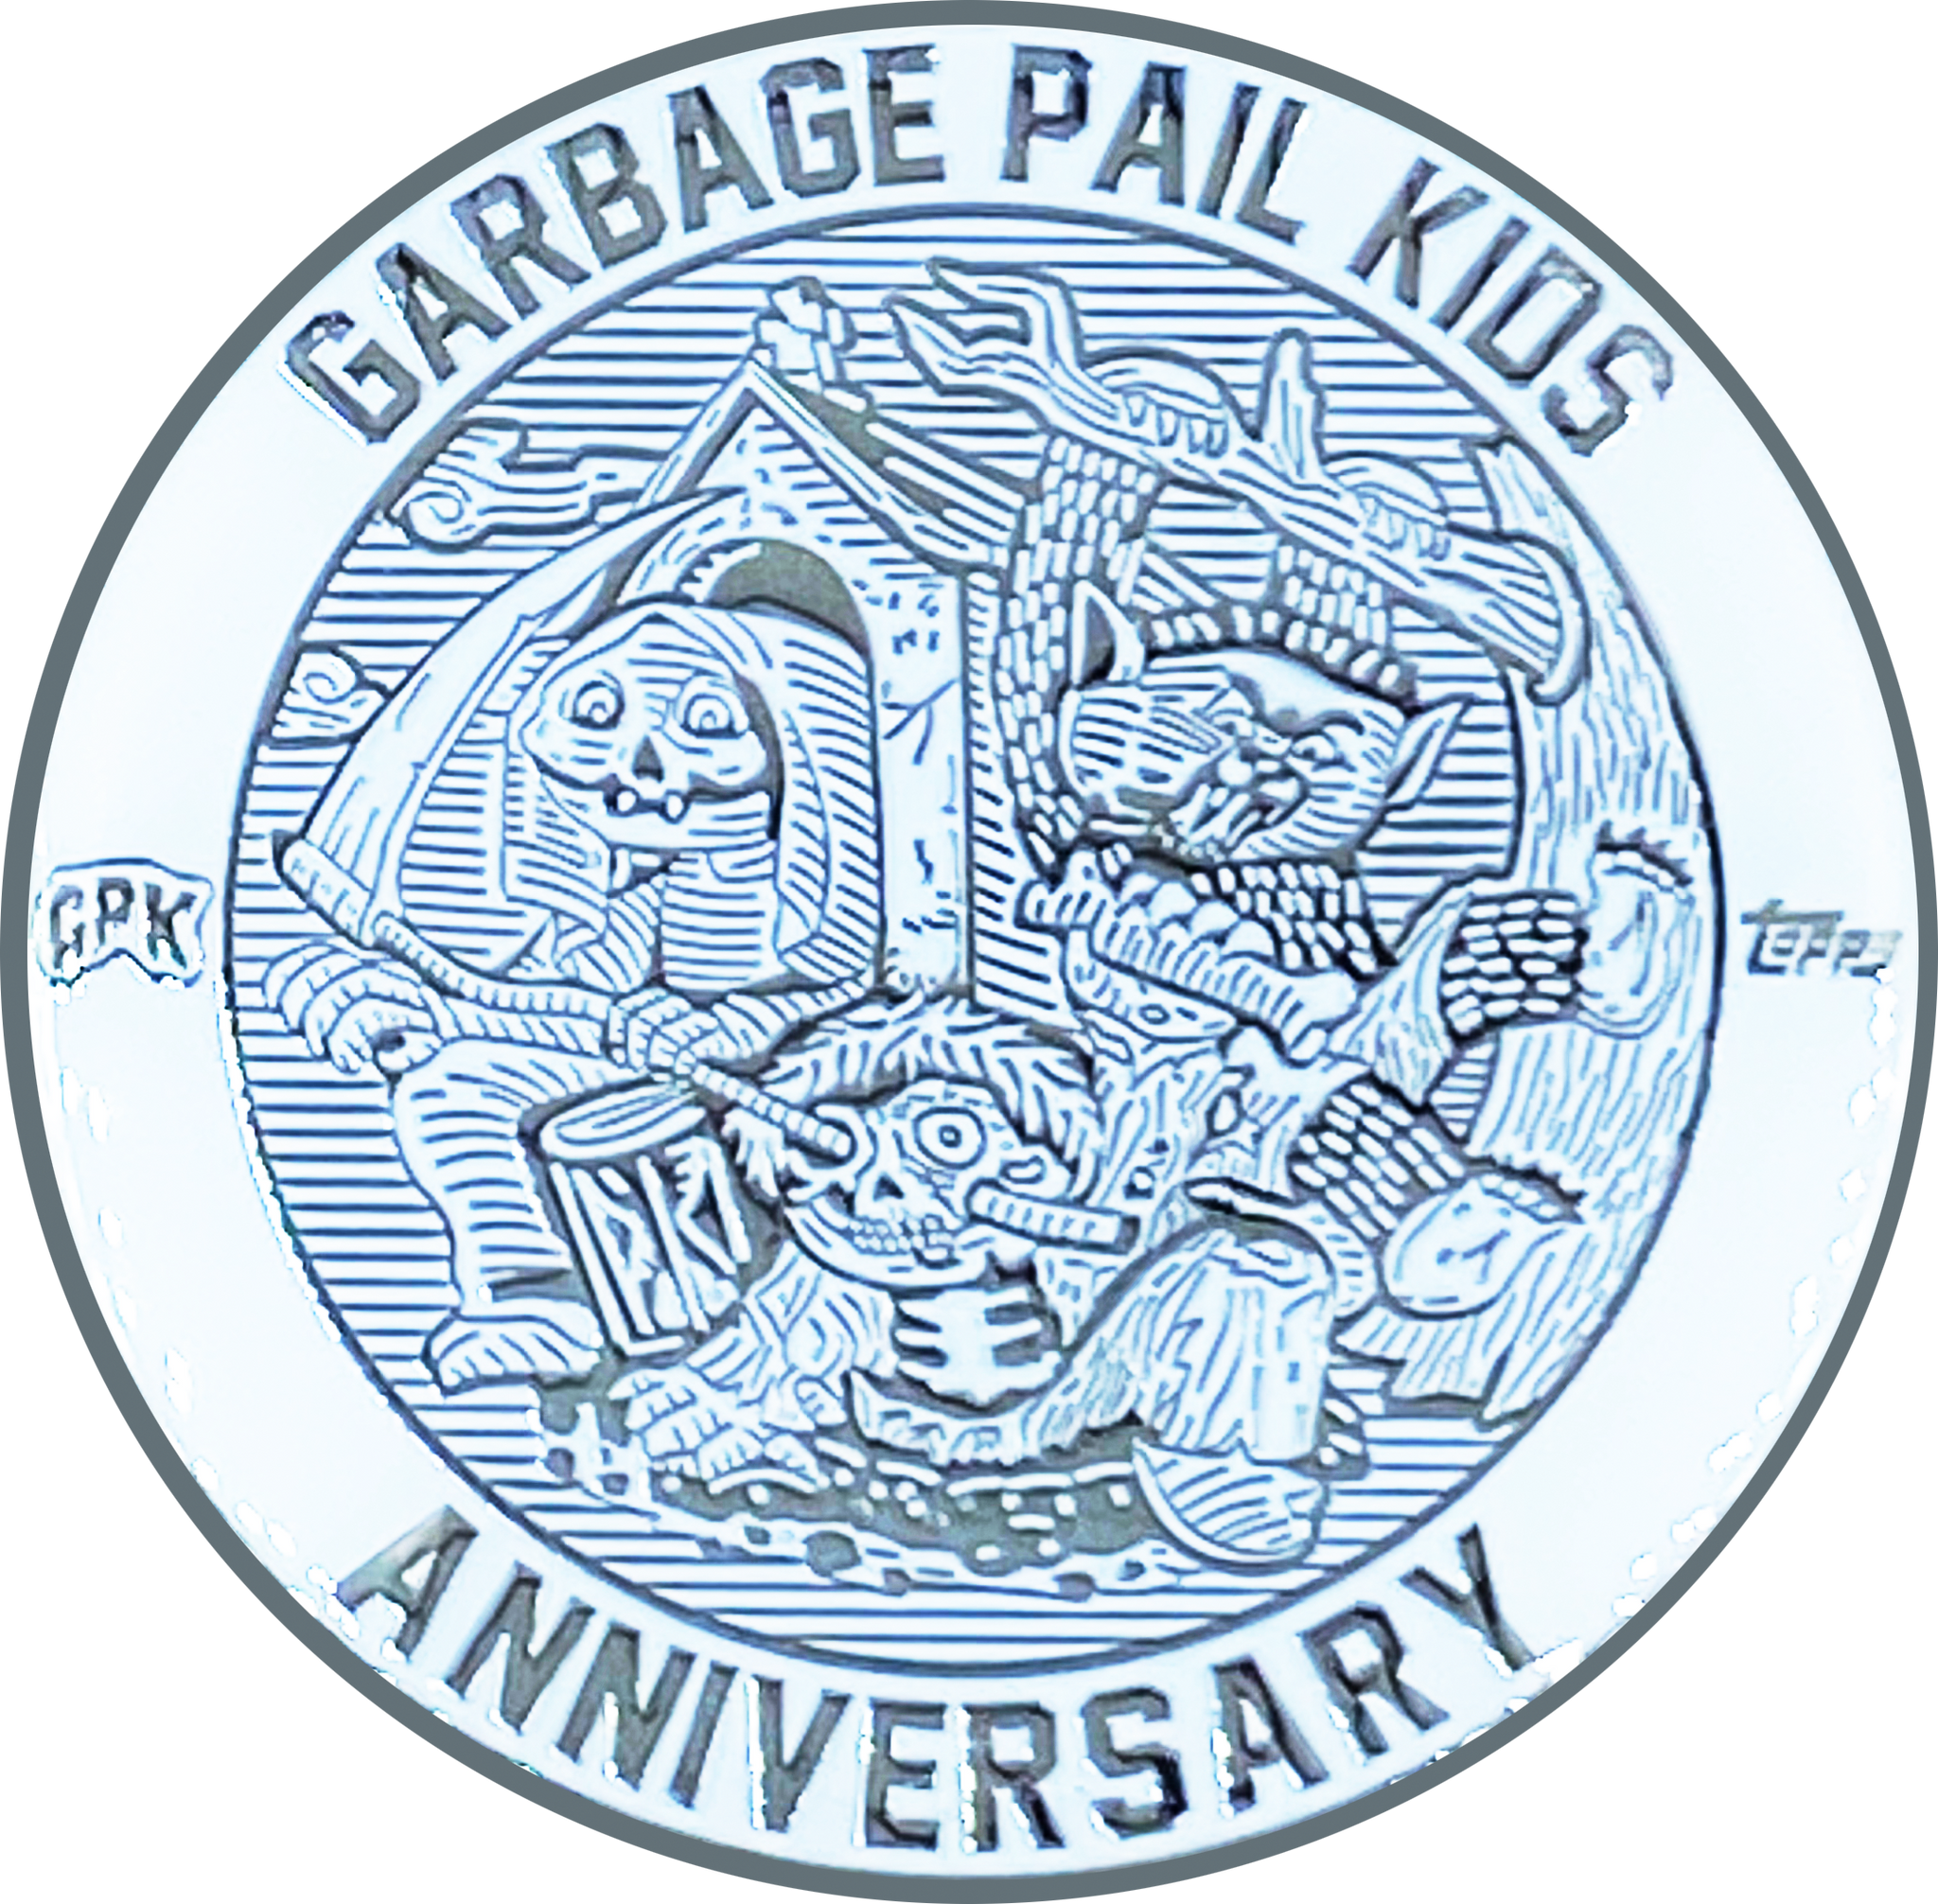 Coin 001 Nickel plated white cloisonné Topps Officially Licensed challenge coin Garbage Pail Kids GPK Nation